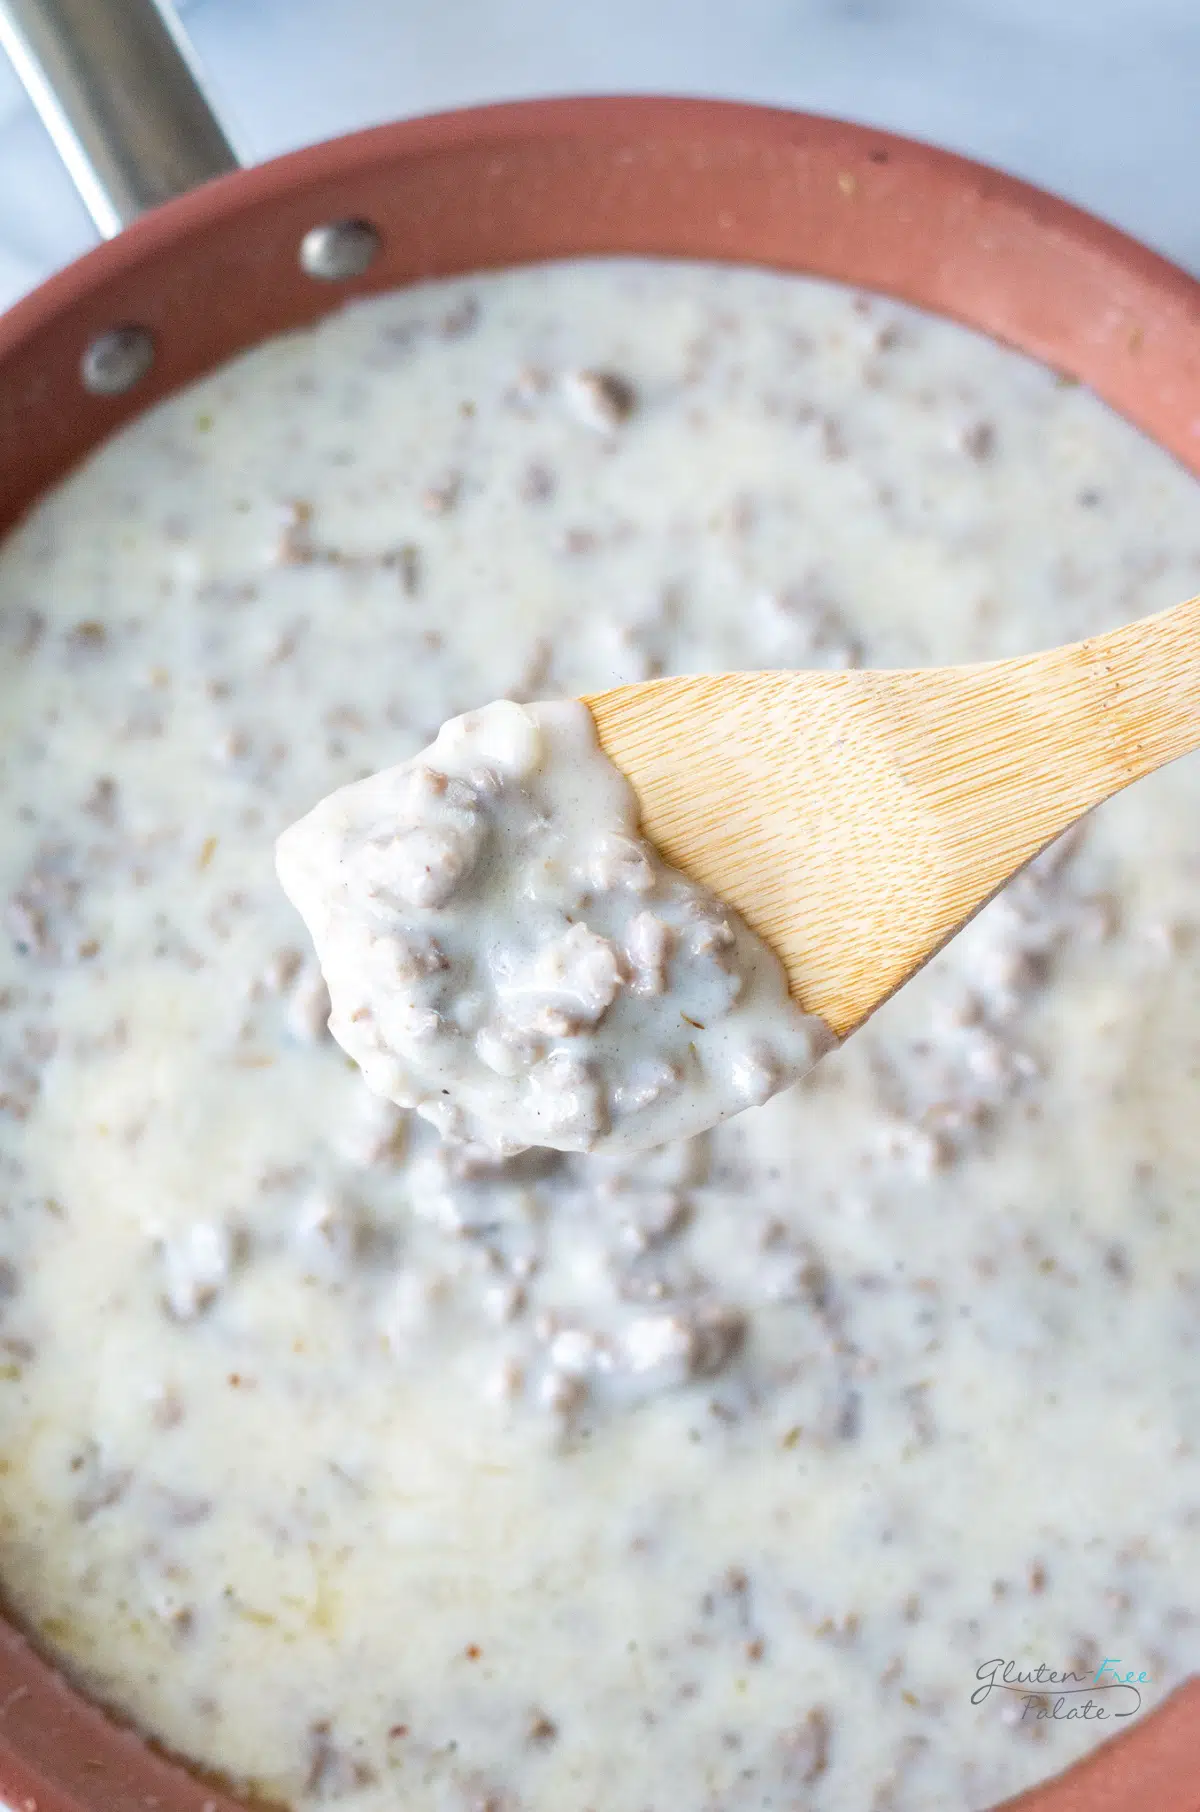 a copper skillet of creamy sausage gravy. A wooden spoon is holding some up to show texture.